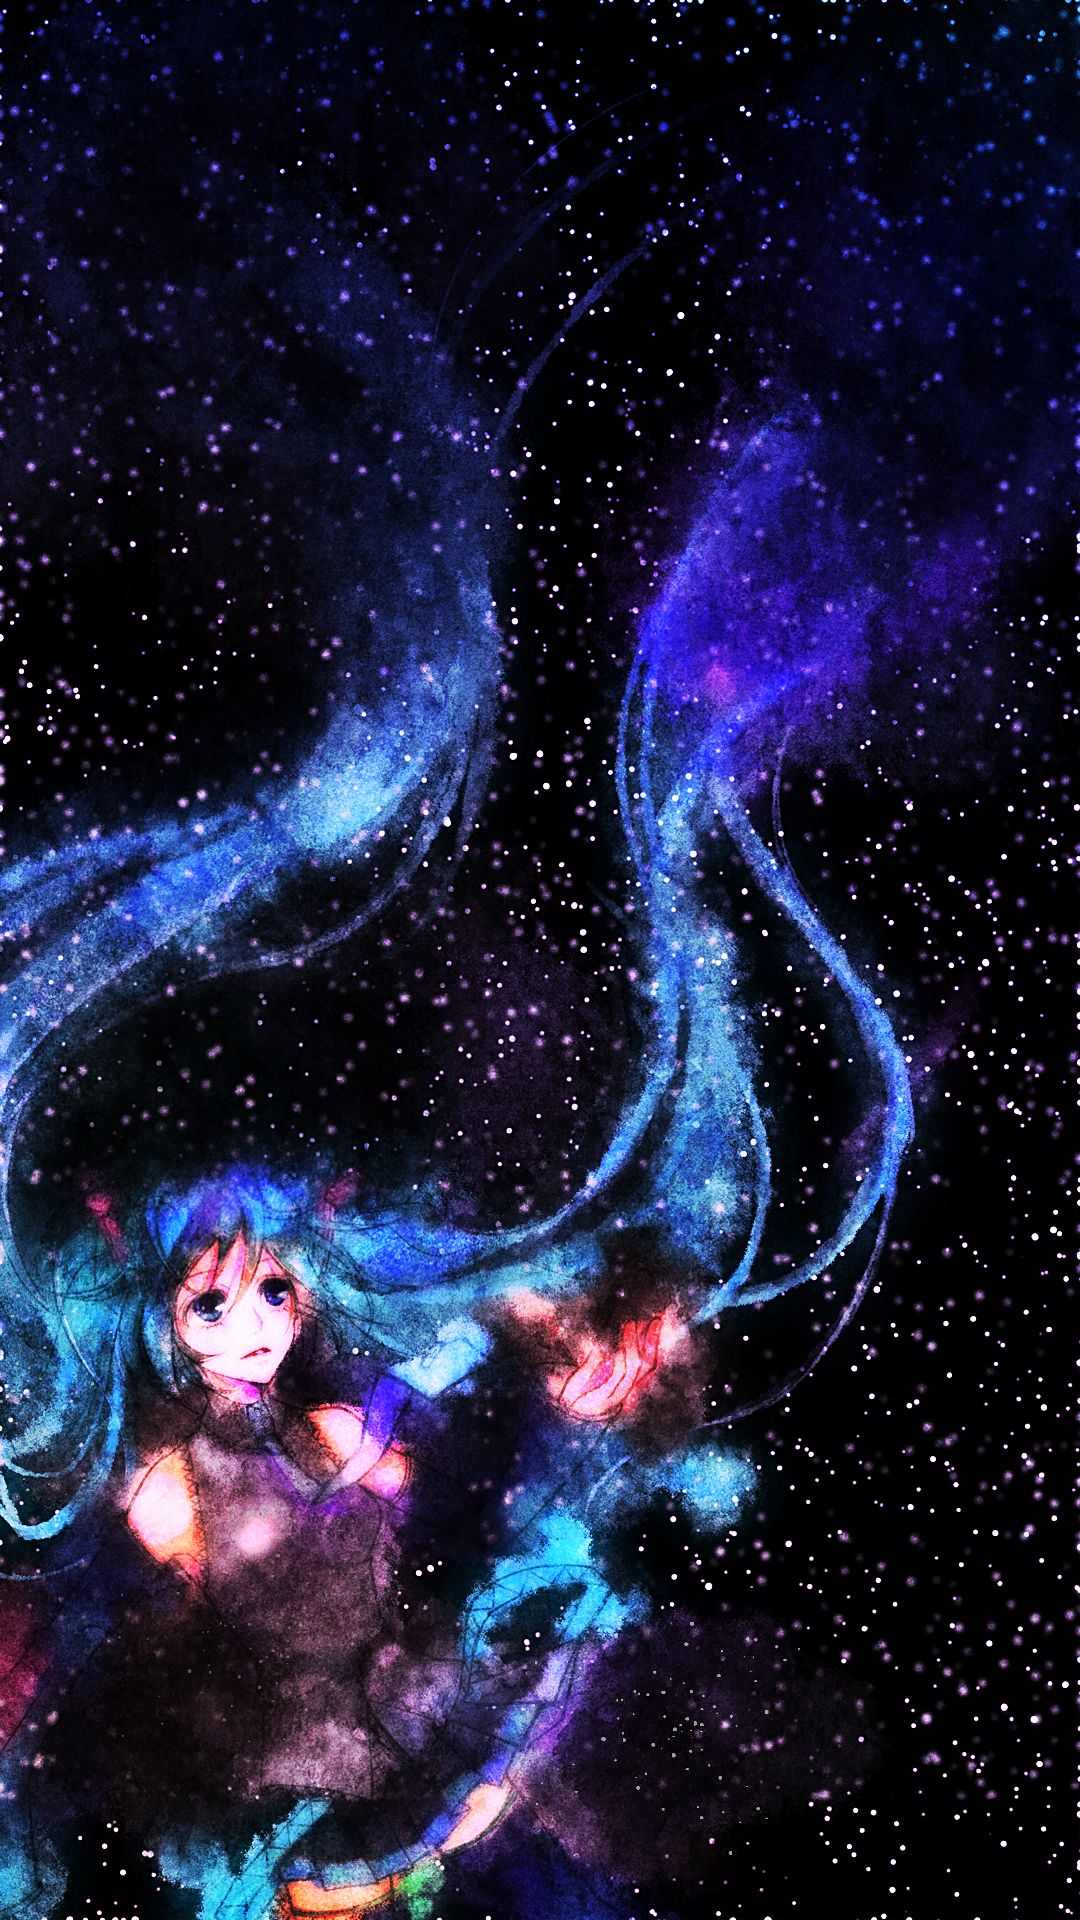 Free download wallpaper Wallpaper Hatsune Miku android wallpaper Android [1080x1920] for your Desktop, Mobile & Tablet. Explore Hatsune Miku Android Wallpaper. Hatsune Miku Android Wallpaper, Miku Hatsune Wallpaper, Miku